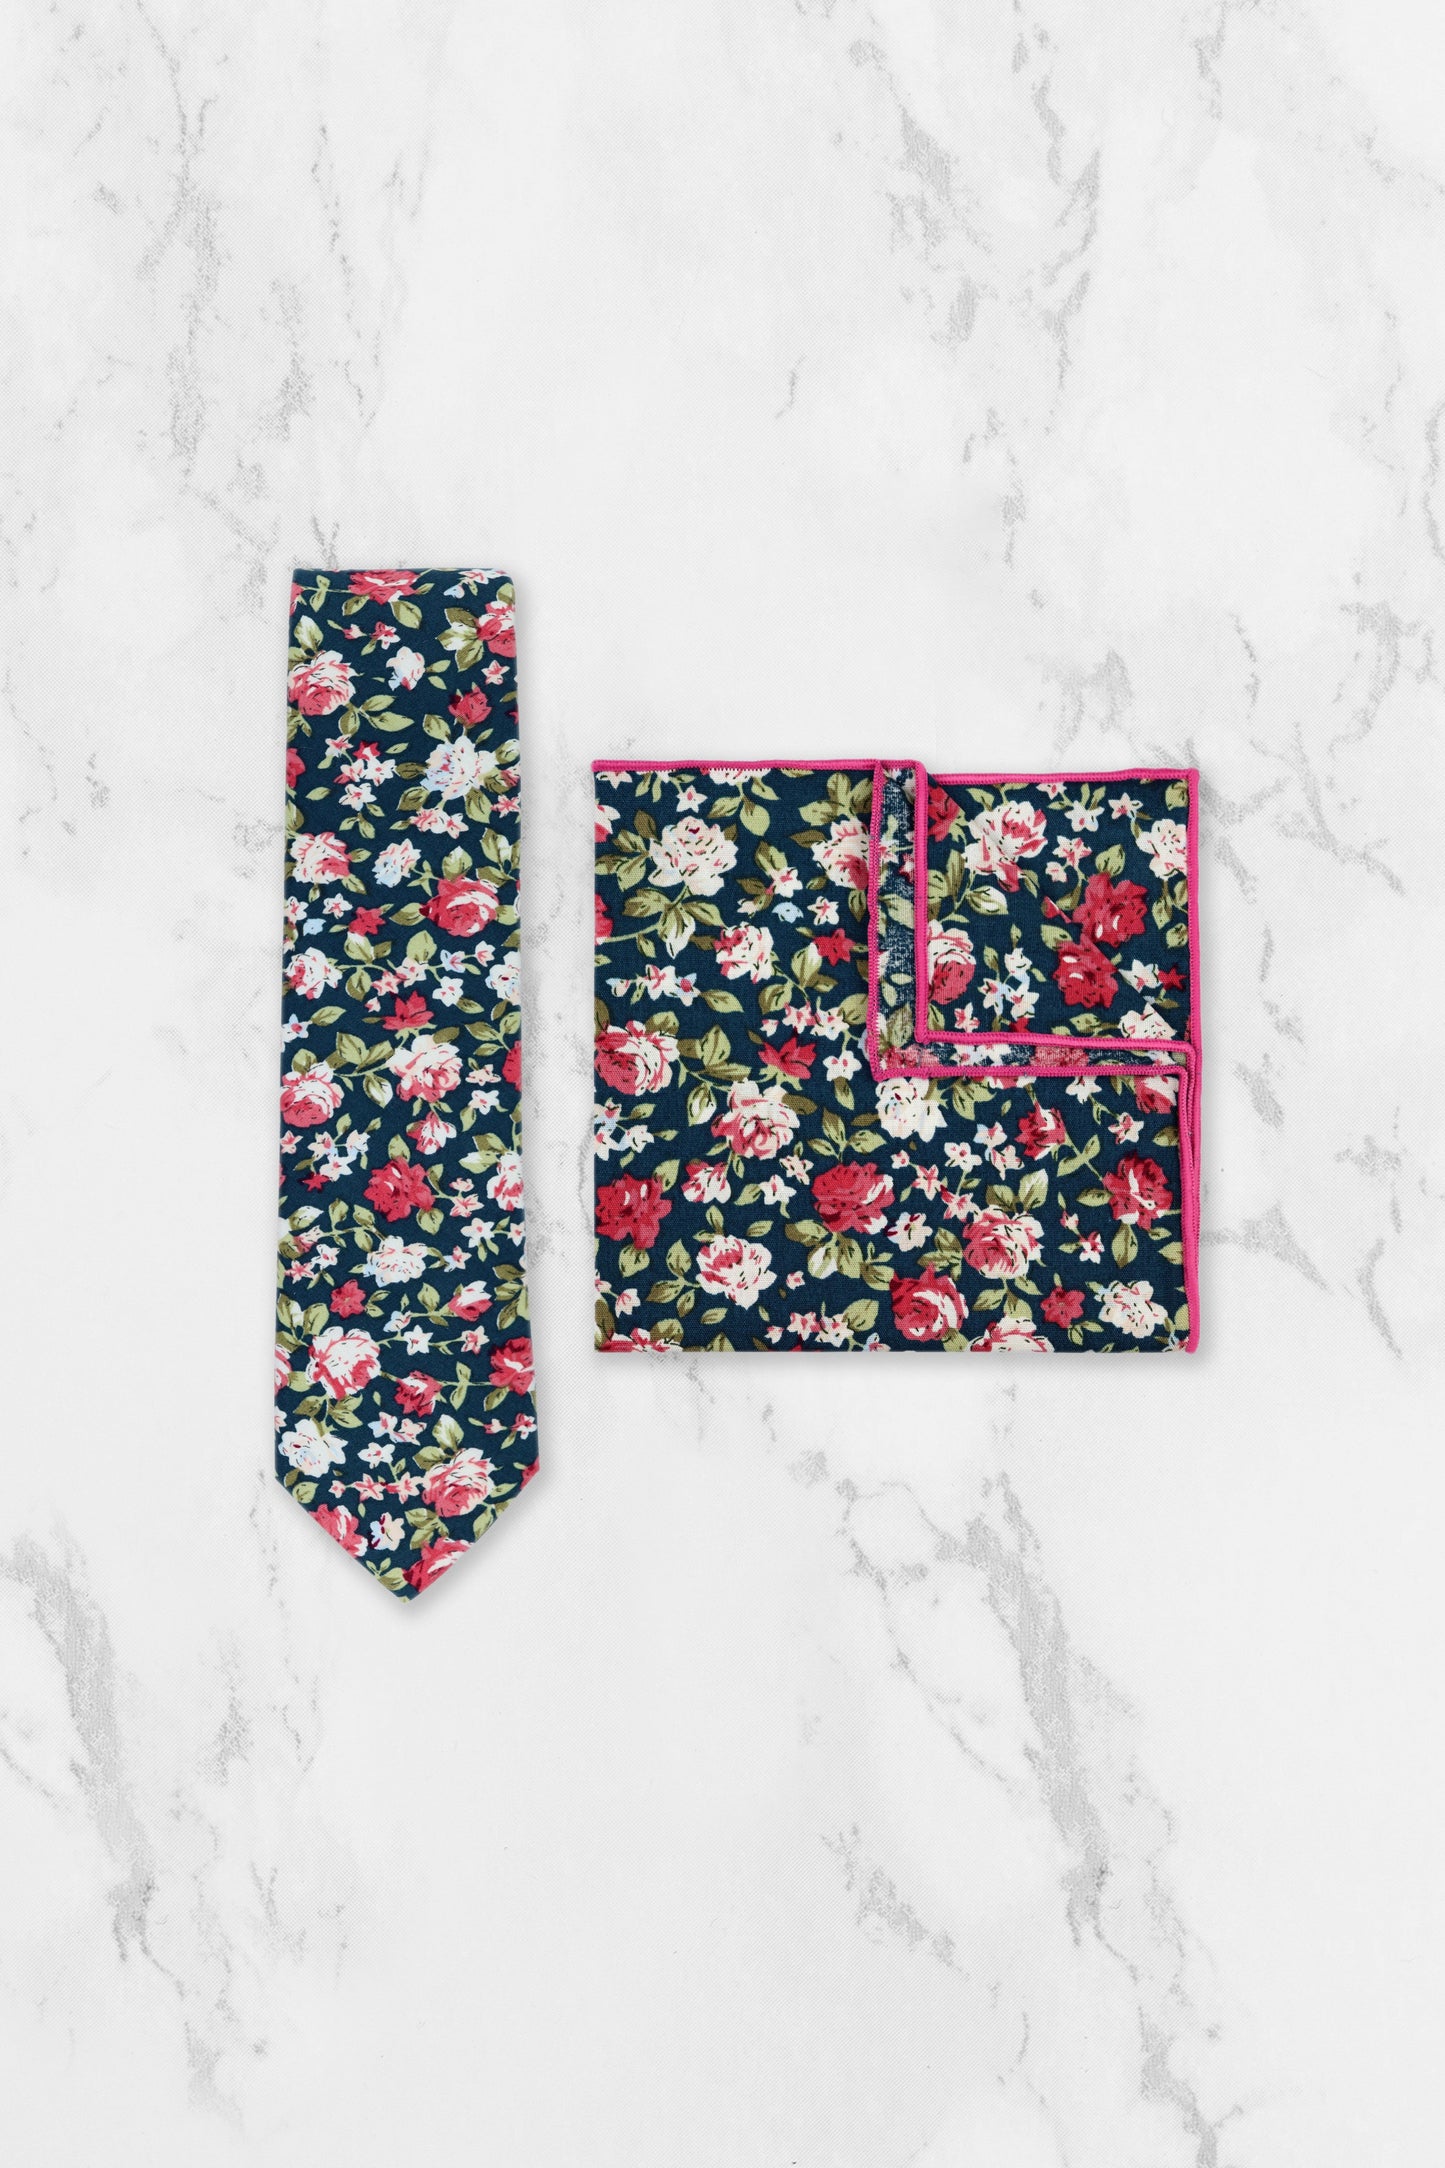 100% Cotton Floral Print Bow Tie - Green & Pink